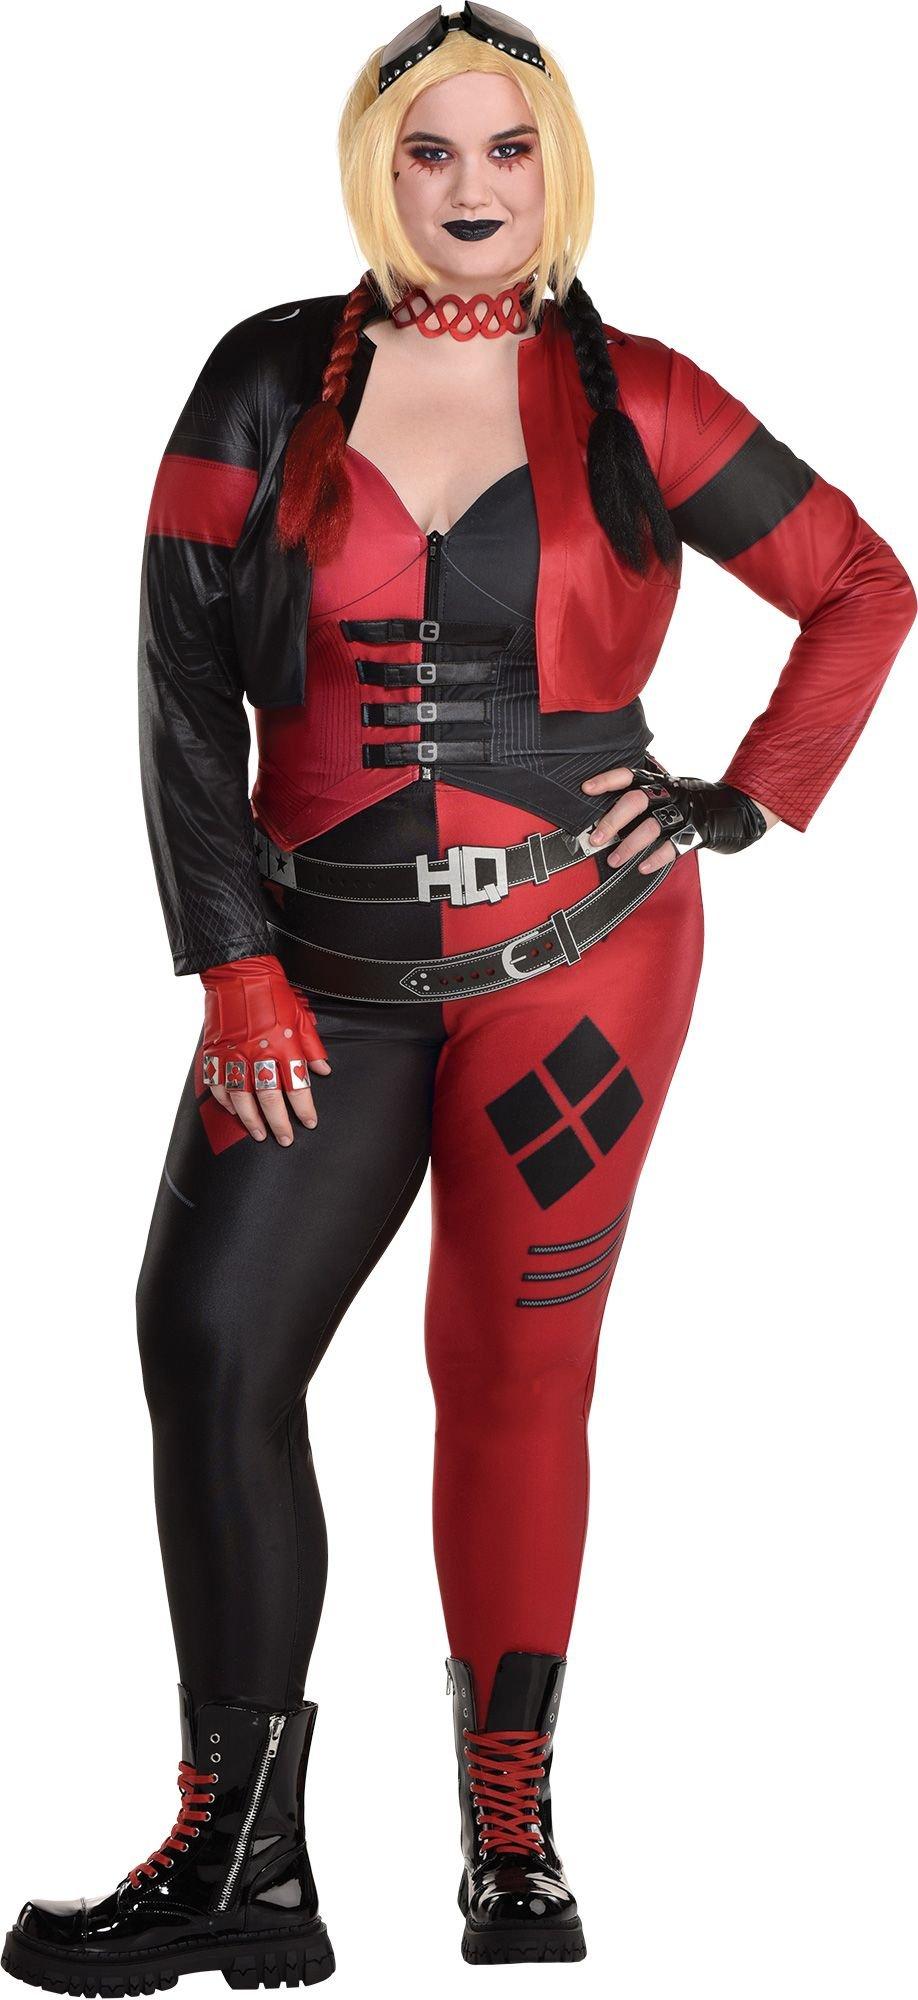 Suicide Squad Harley Quinn Costume (Large), Women's